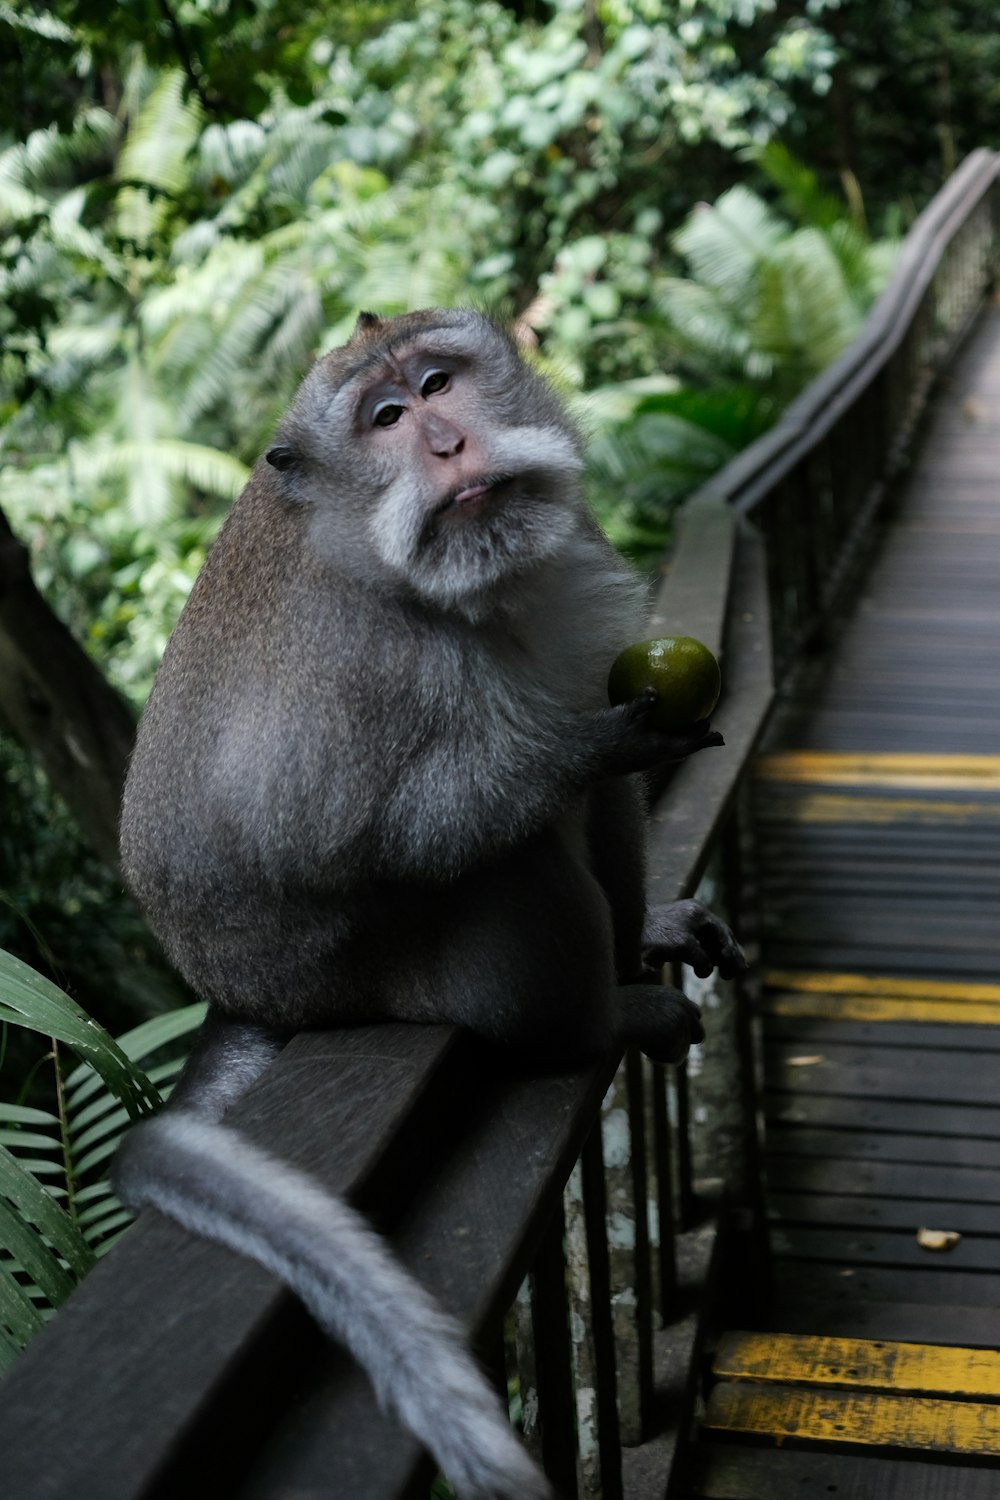 a monkey is sitting on a railing and holding a fruit